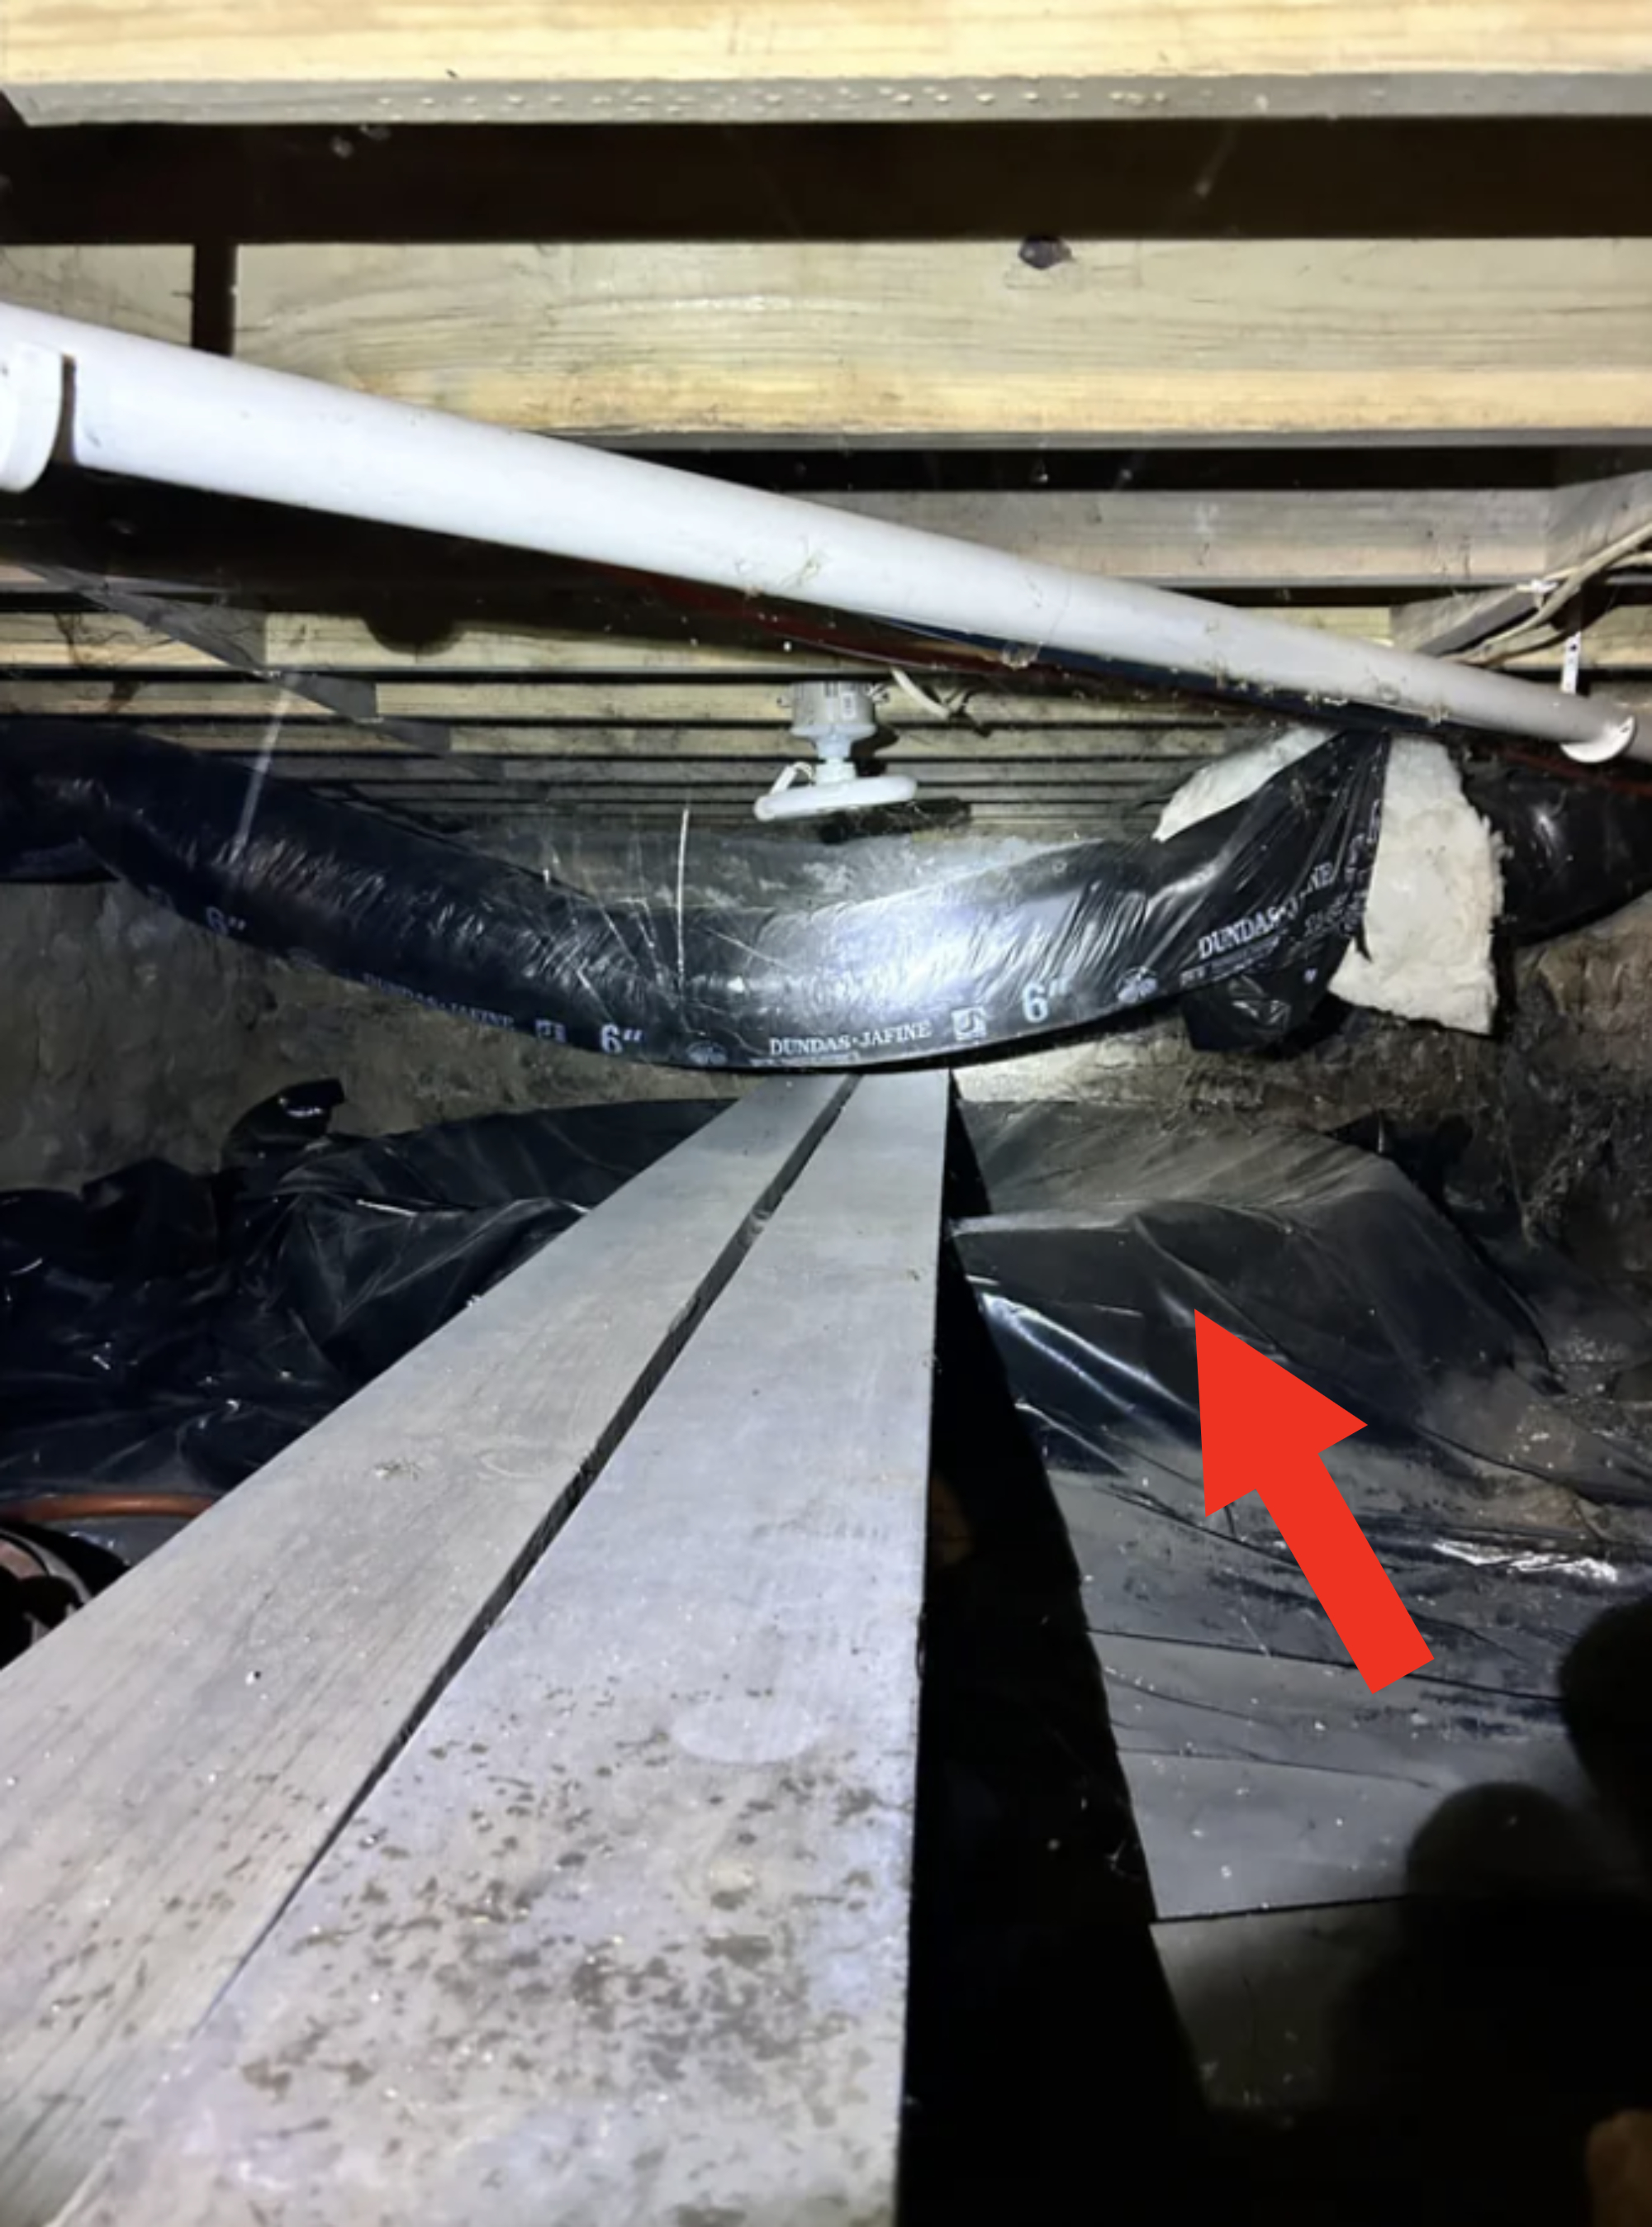 Crawl space under a house with wooden planks, pipes, and covered soil